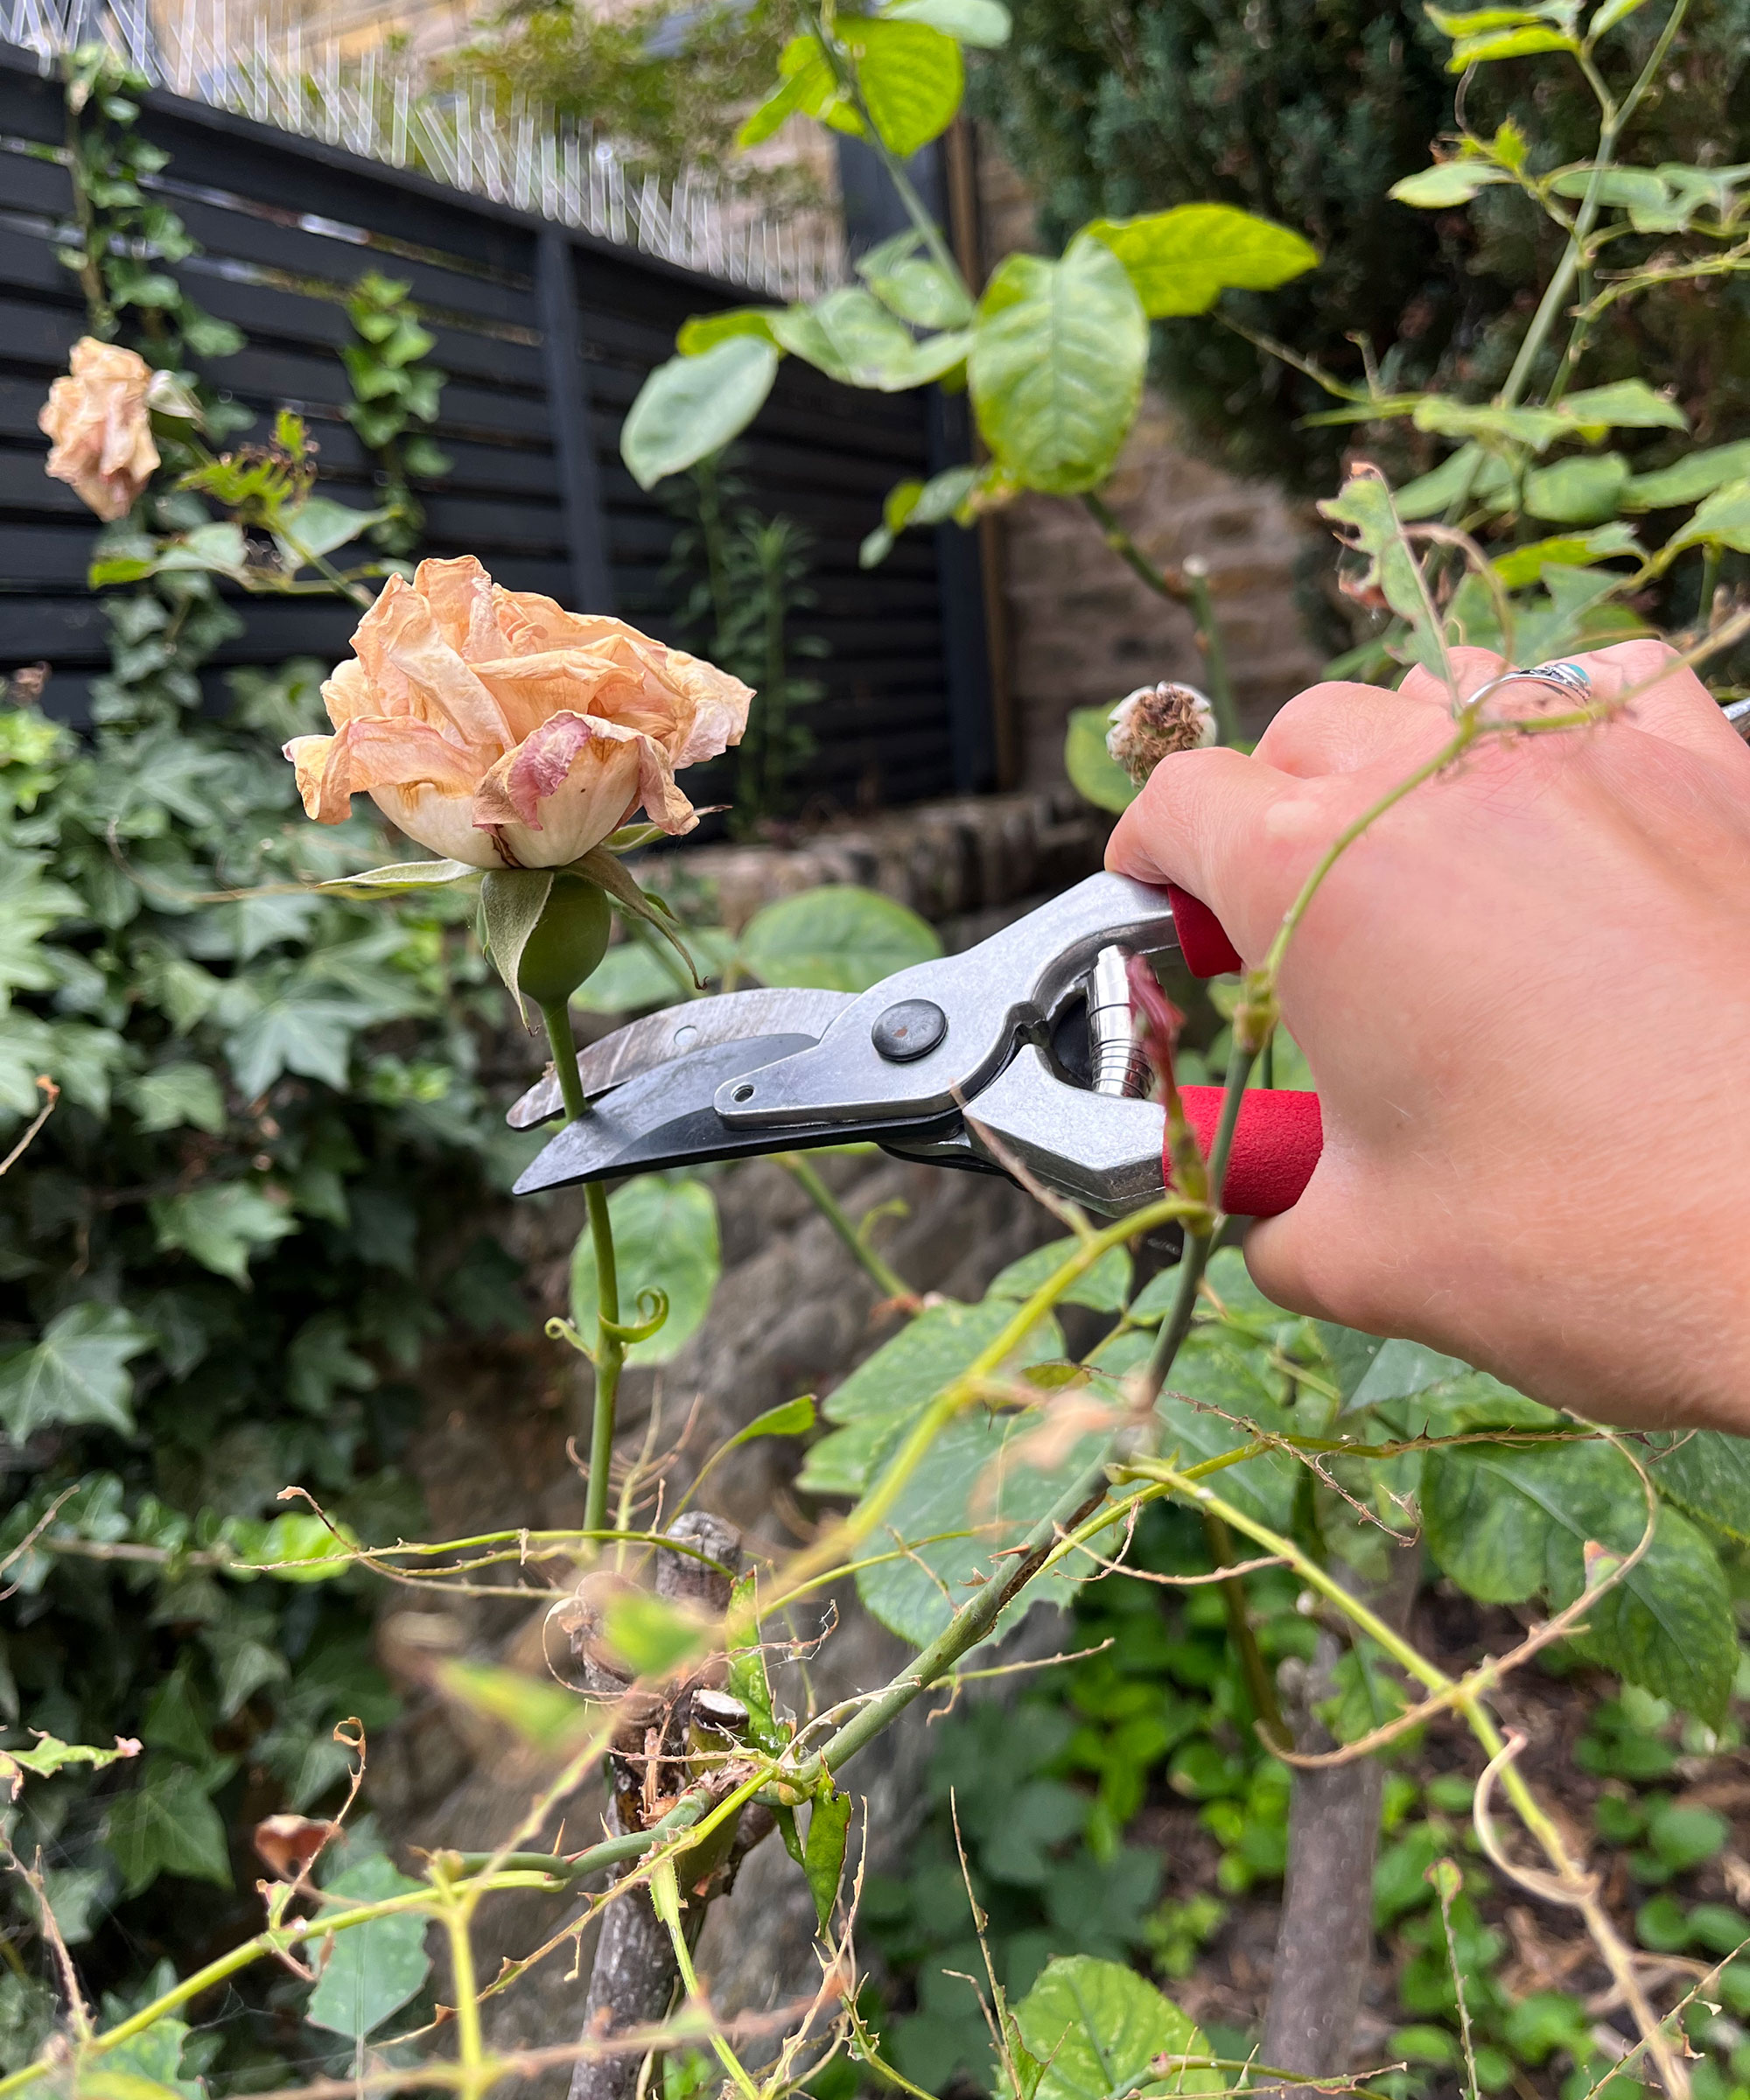 Using secateurs to deadhead roses in summer